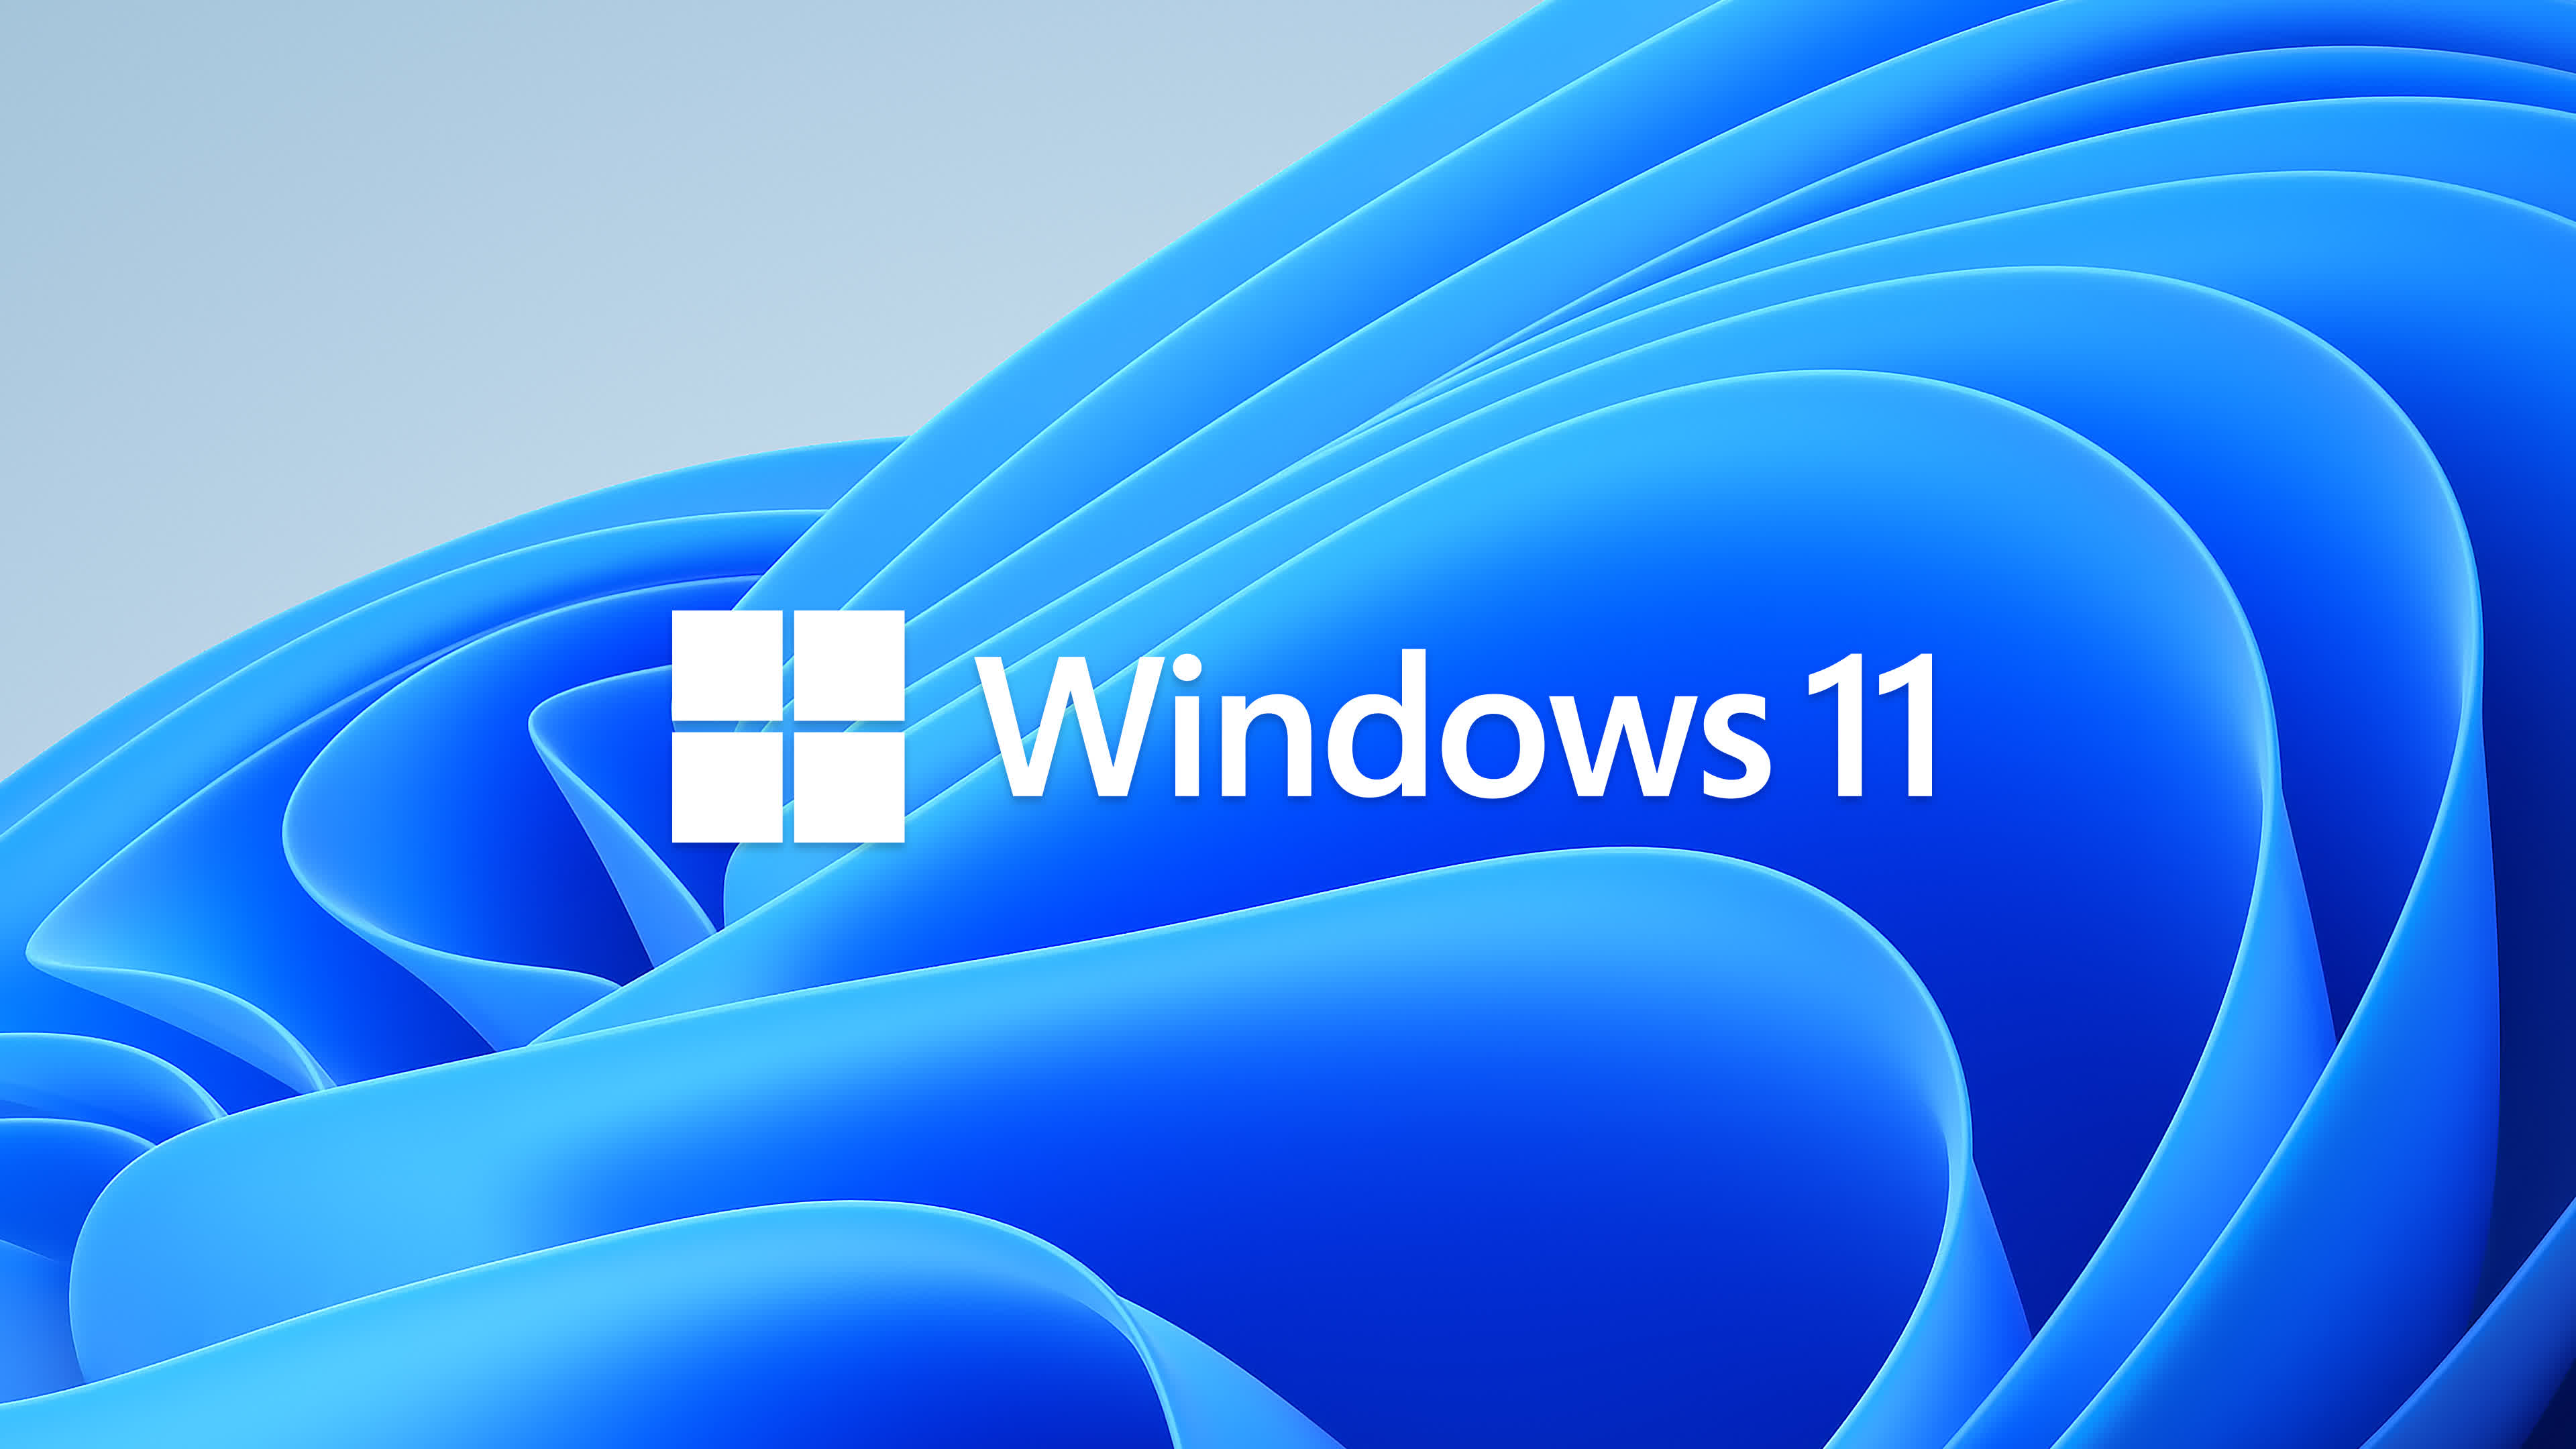 Microsoft tells Windows 11 Insider build users with unsupported PCs to reinstall Windows 10